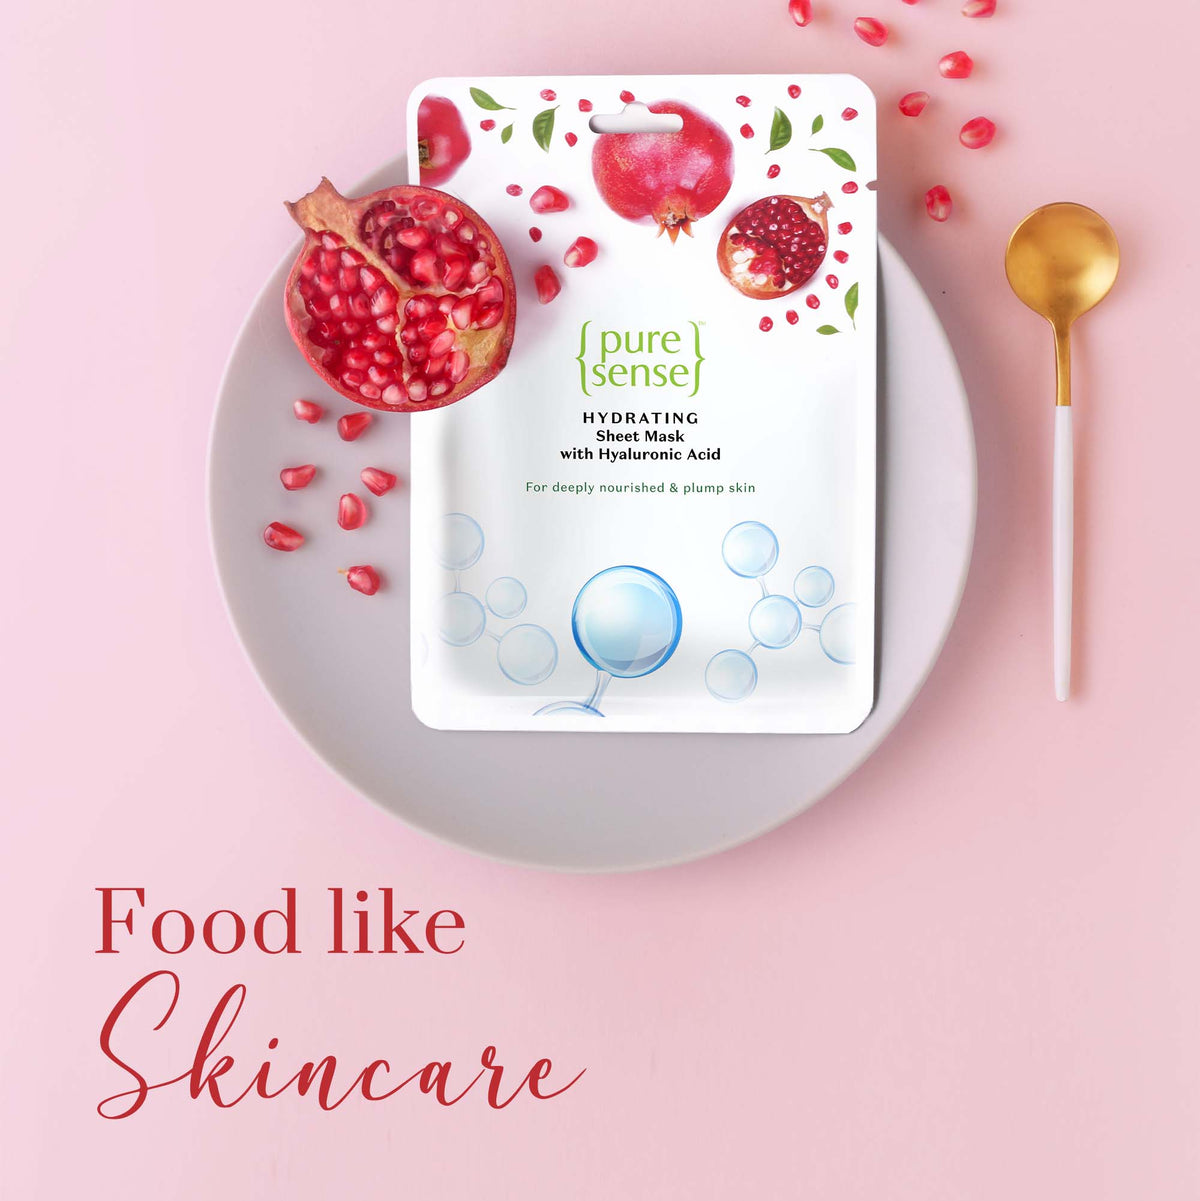 Hydrating Sheet Mask with Hyaluronic Acid |  From the makers of Parachute Advansed | 15ml - PureSense